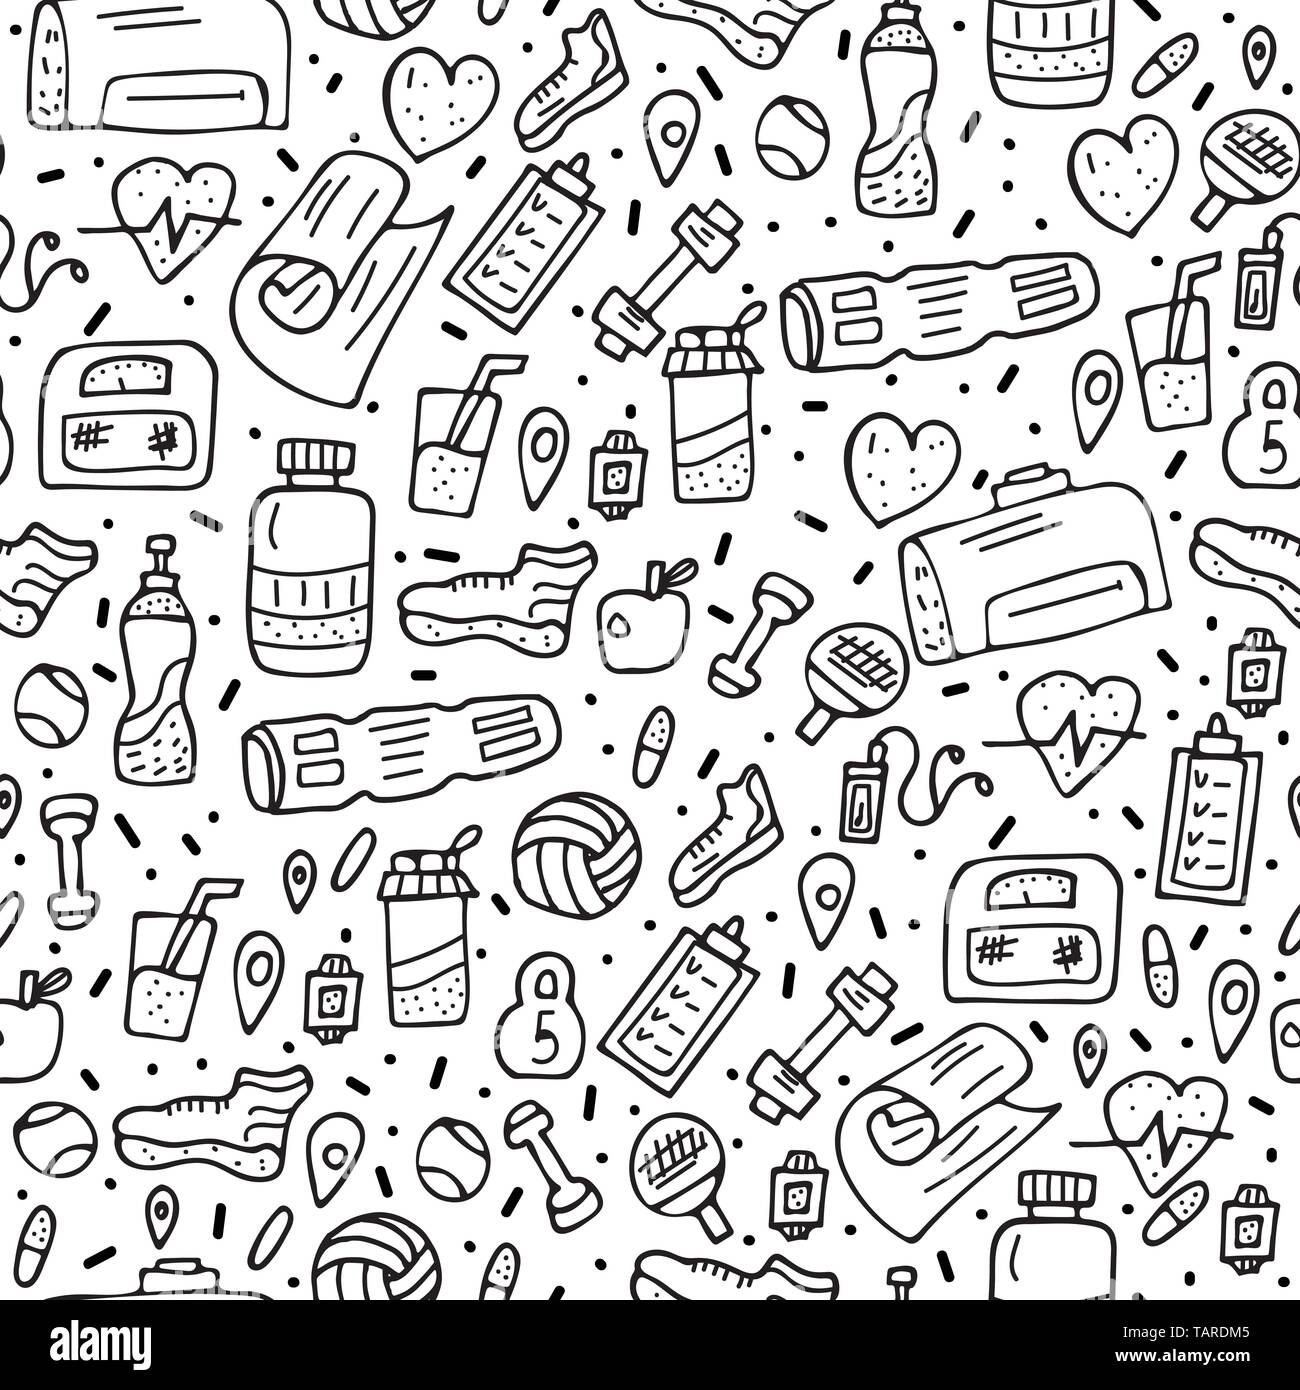 Seamless pattern of sport activities tools, symbols in doodle